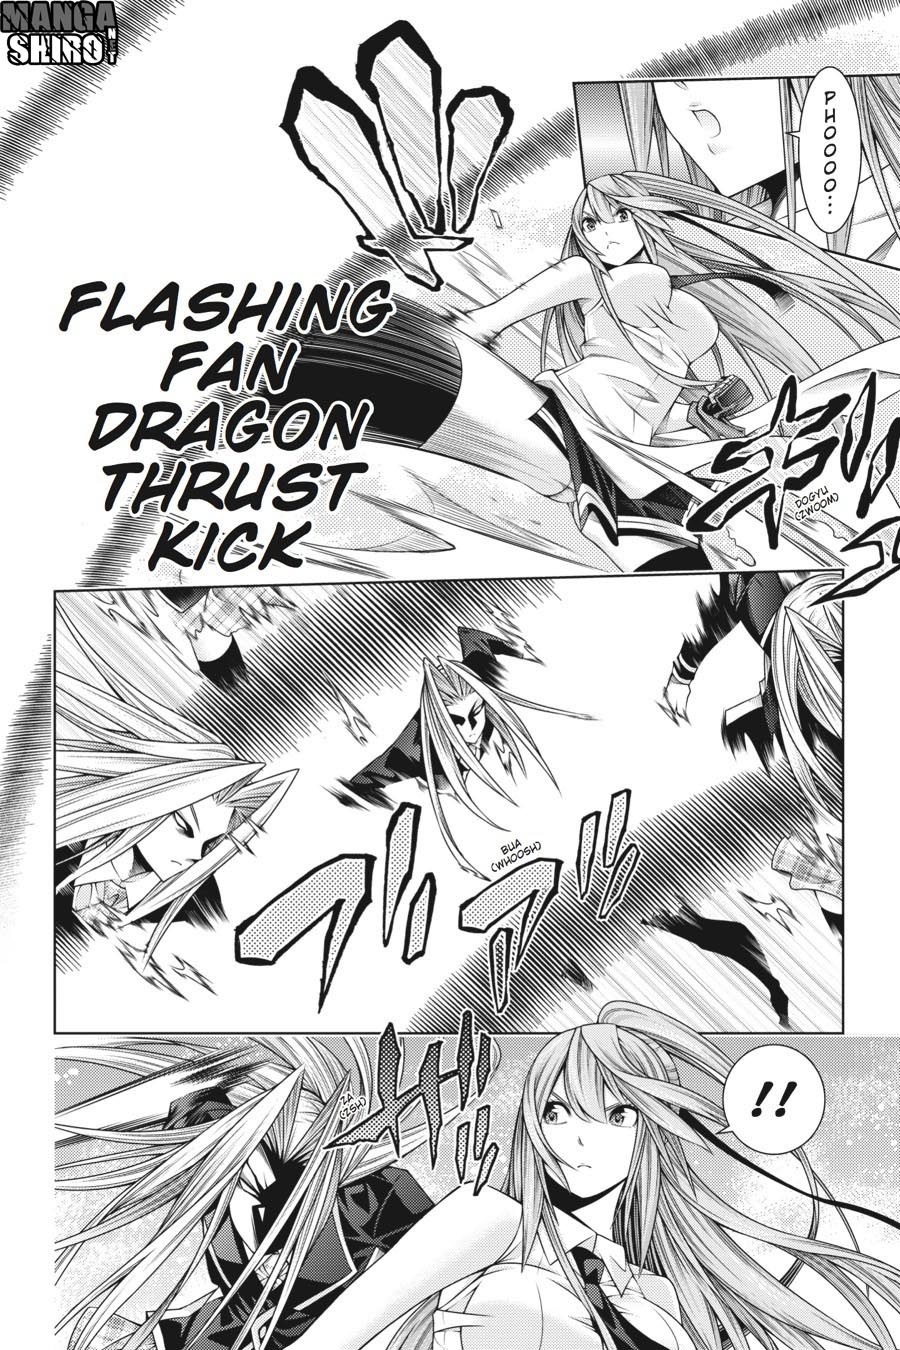 Dragons Rioting Chapter 40